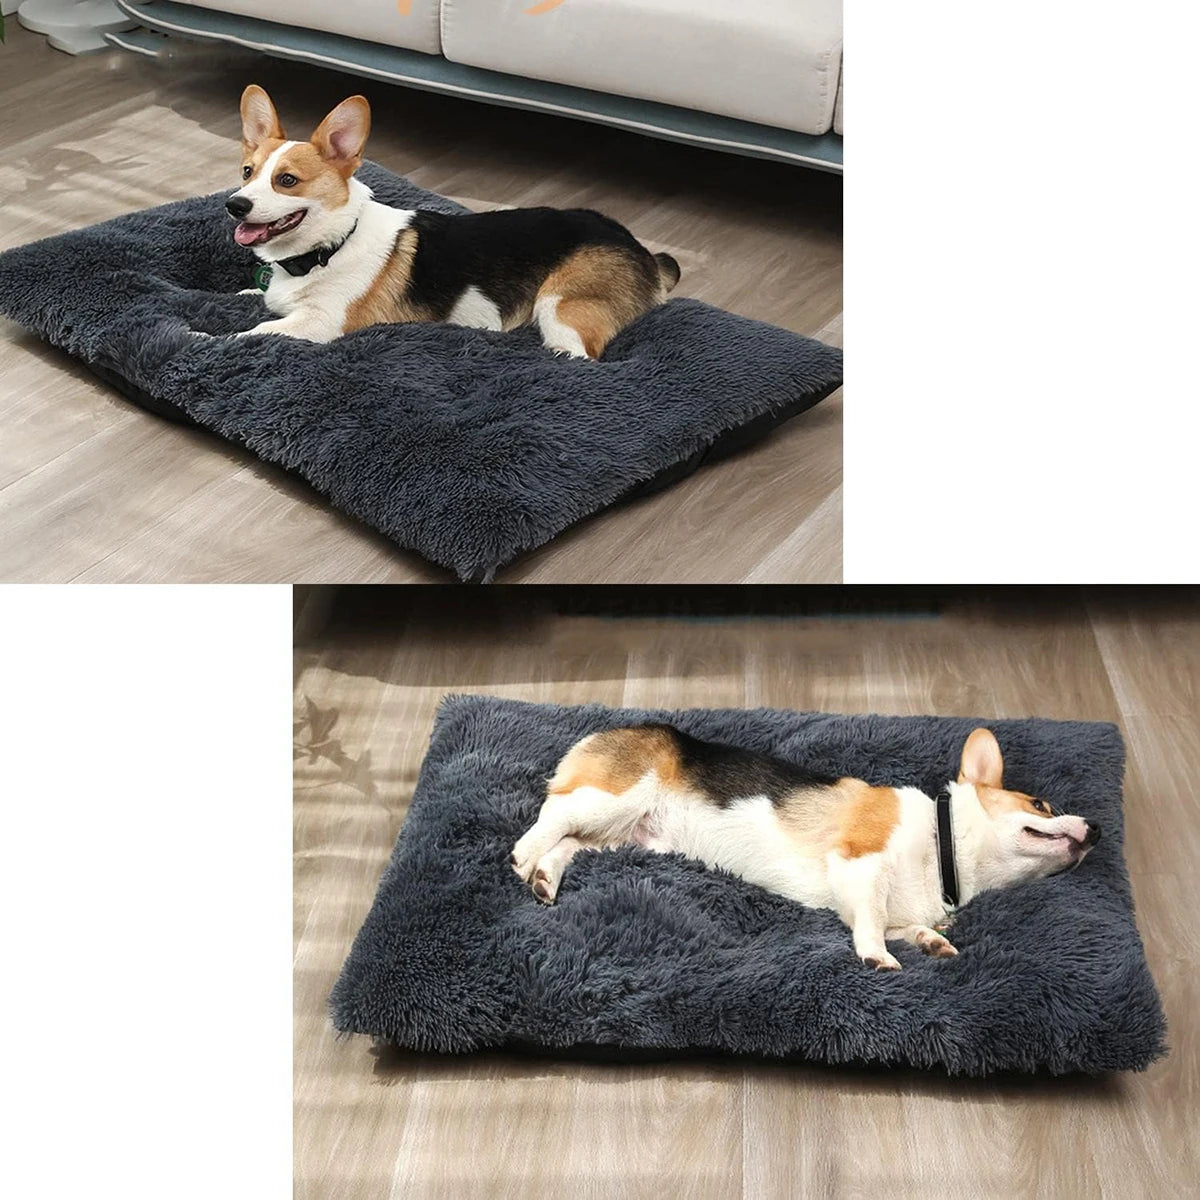 Washable Plush Large Dog Bed - Anti-Anxiety, Warm, Comfortable Sleeping Mat - Dream Pet Supply Store